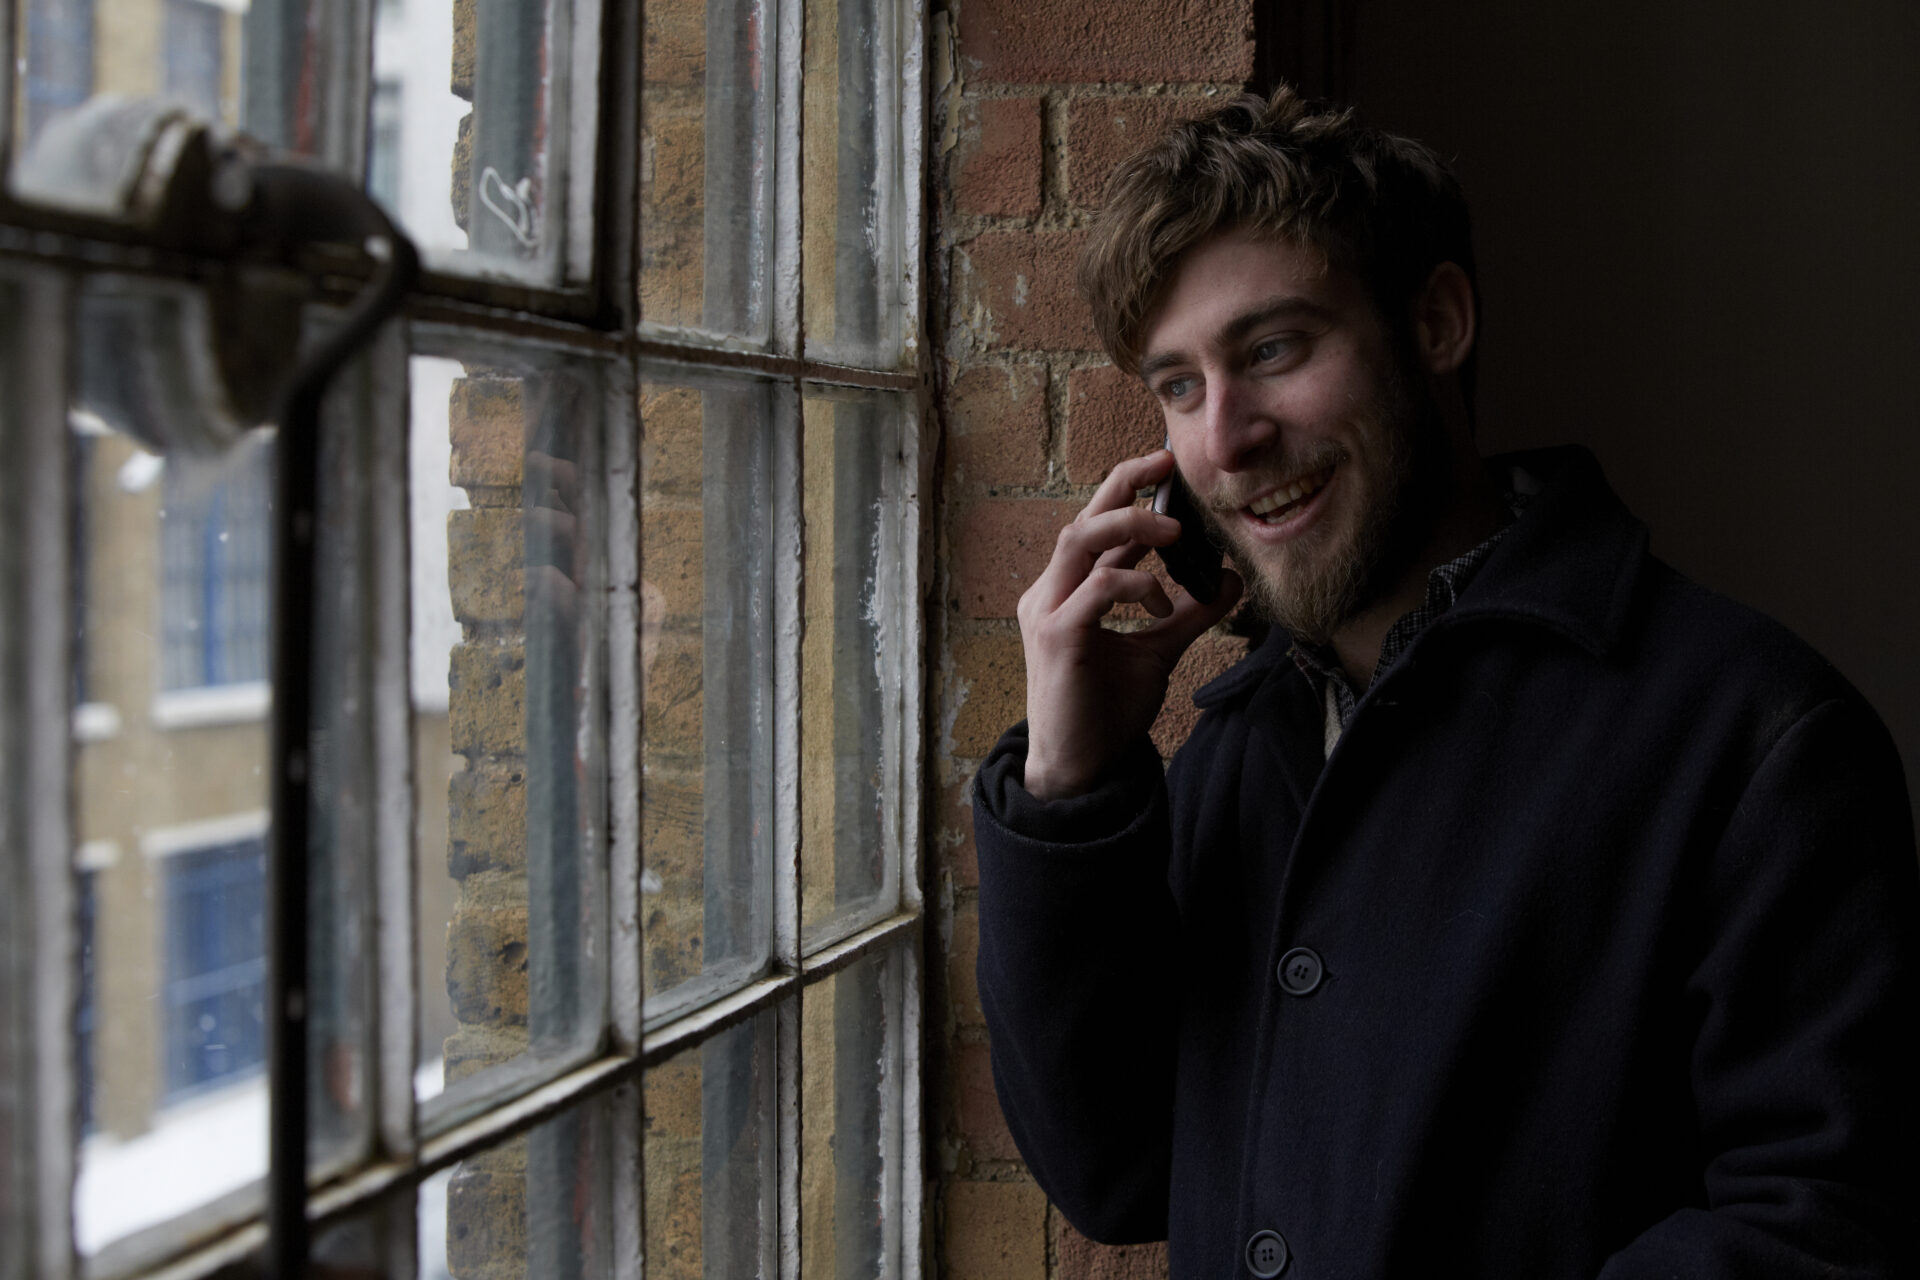 A man smiling and talking on a phone while looking out a window